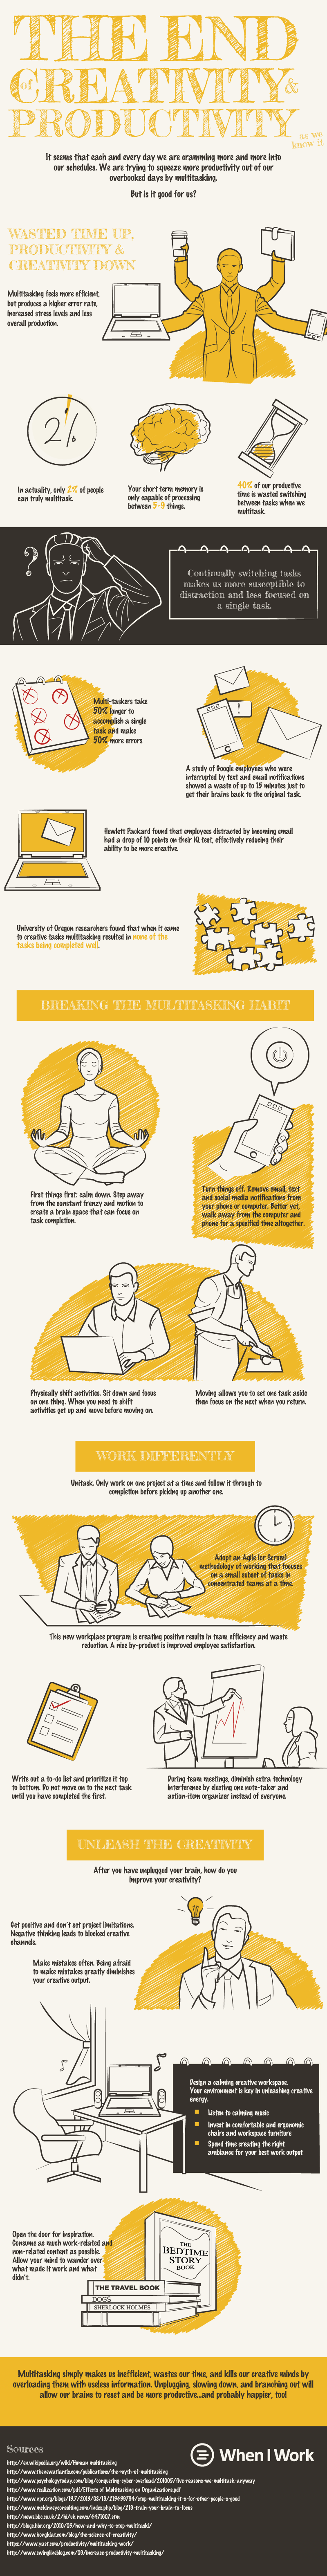 end-of-creativty-and-productivity-as-we-know-it-infographic